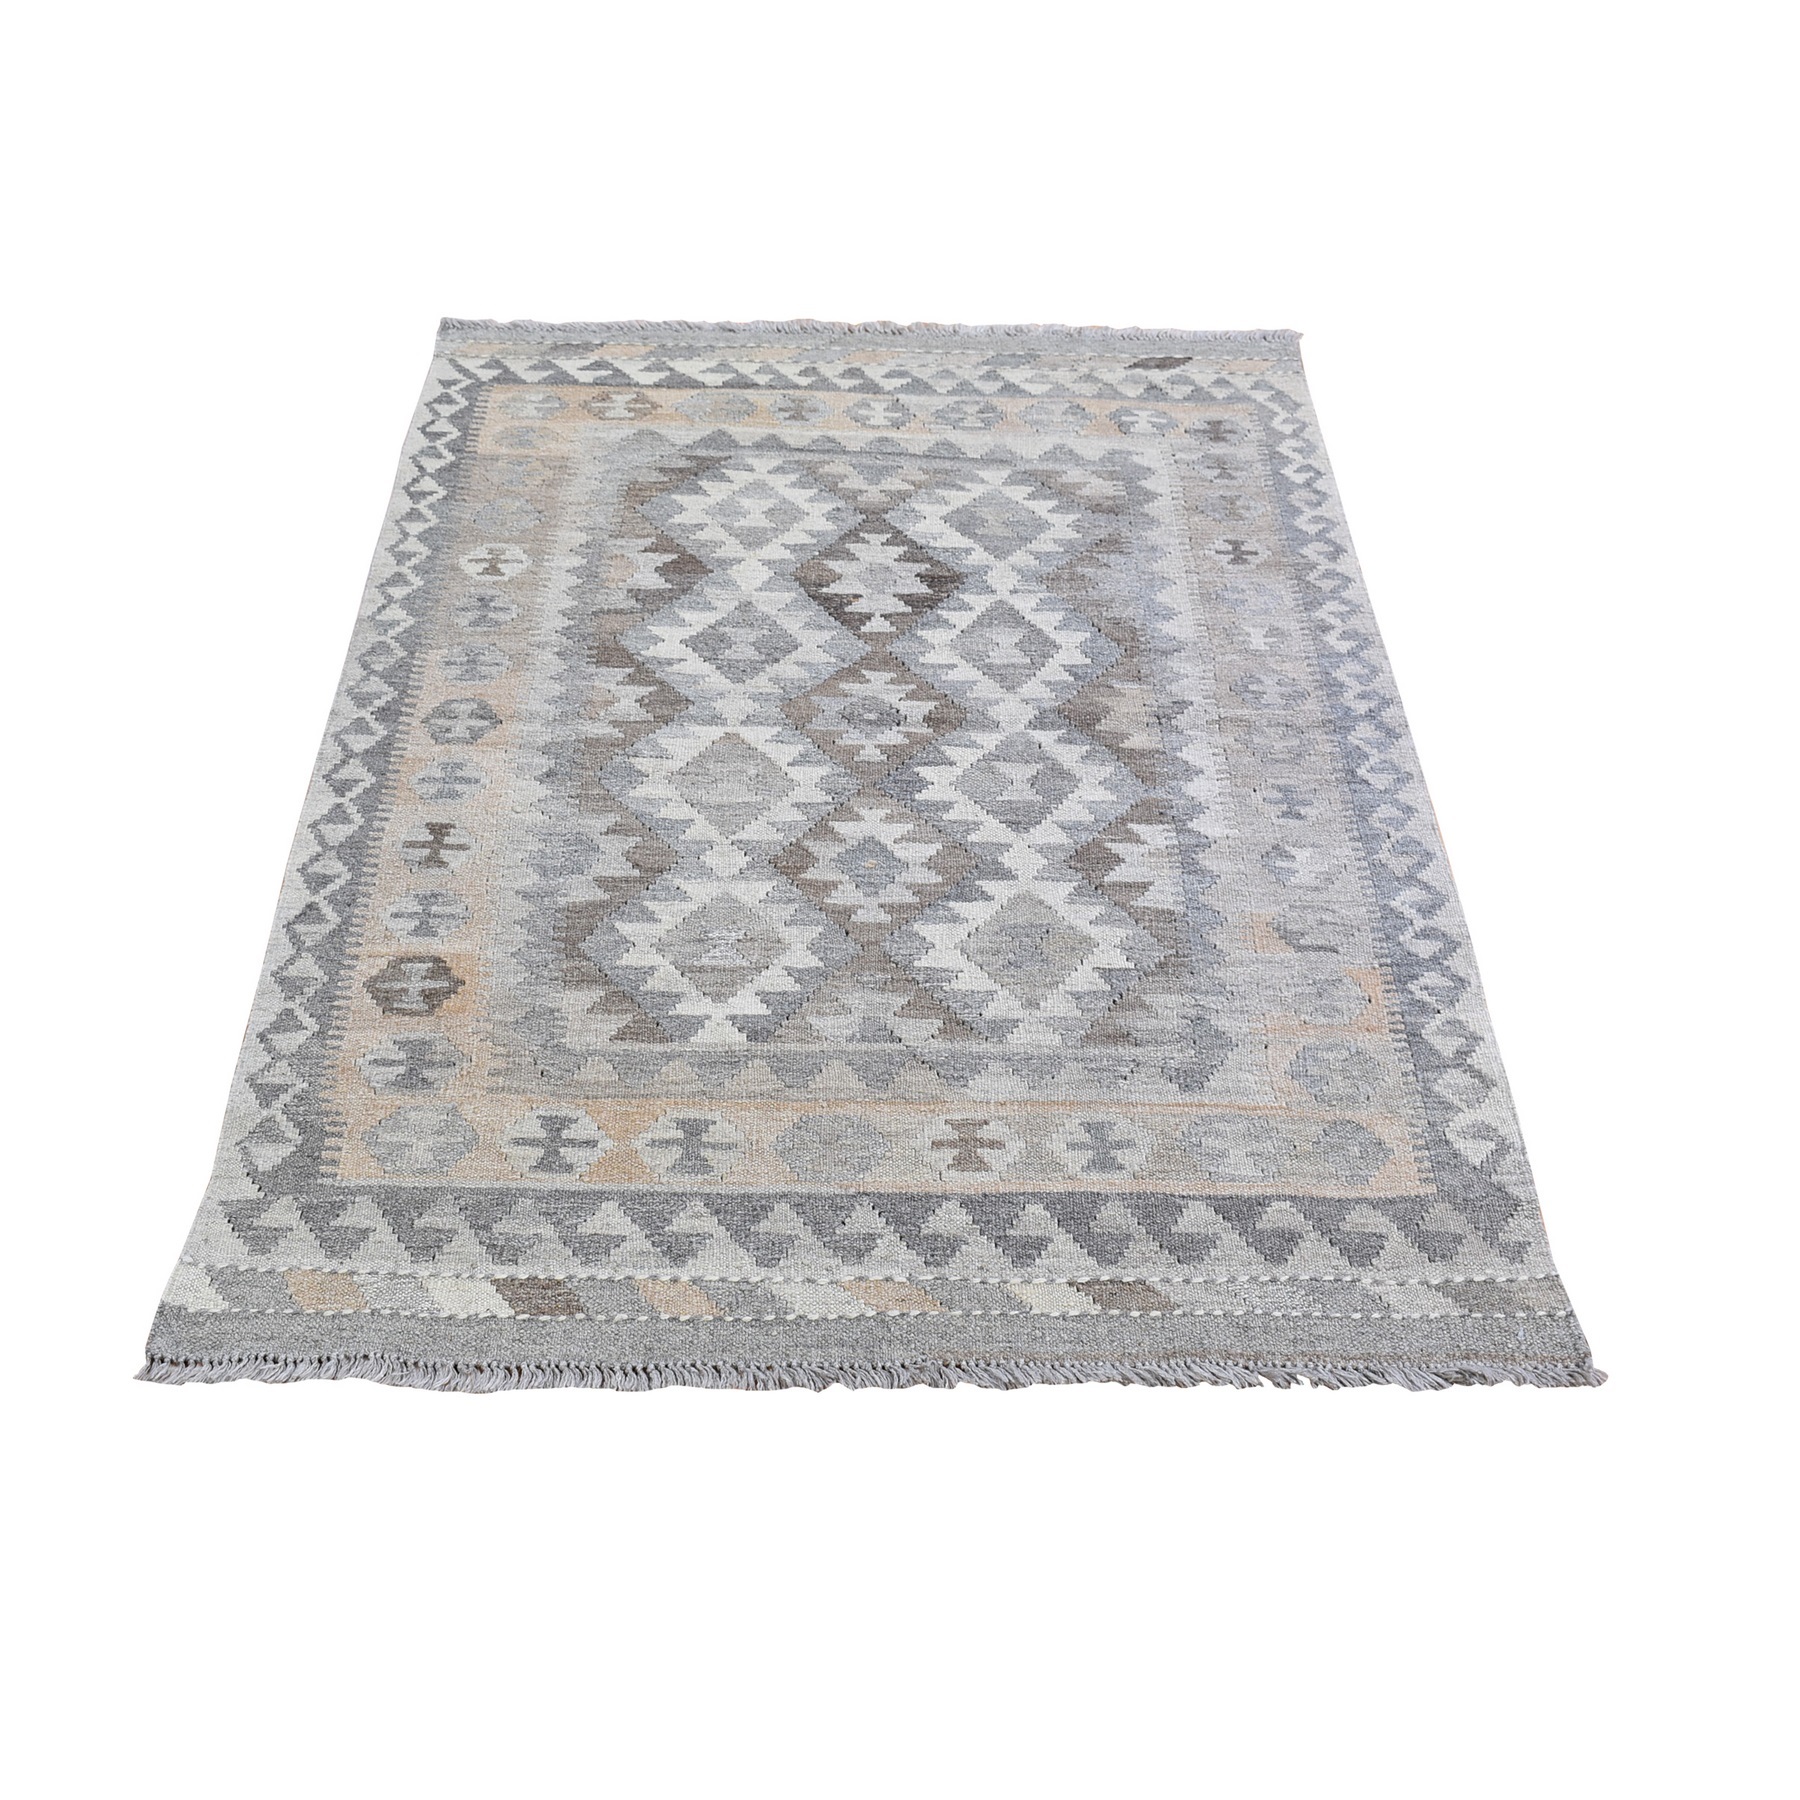 3'5"x5' Gray Undyed Natural Wool Afghan Kilim Reversible Hand Woven Oriental Rug 